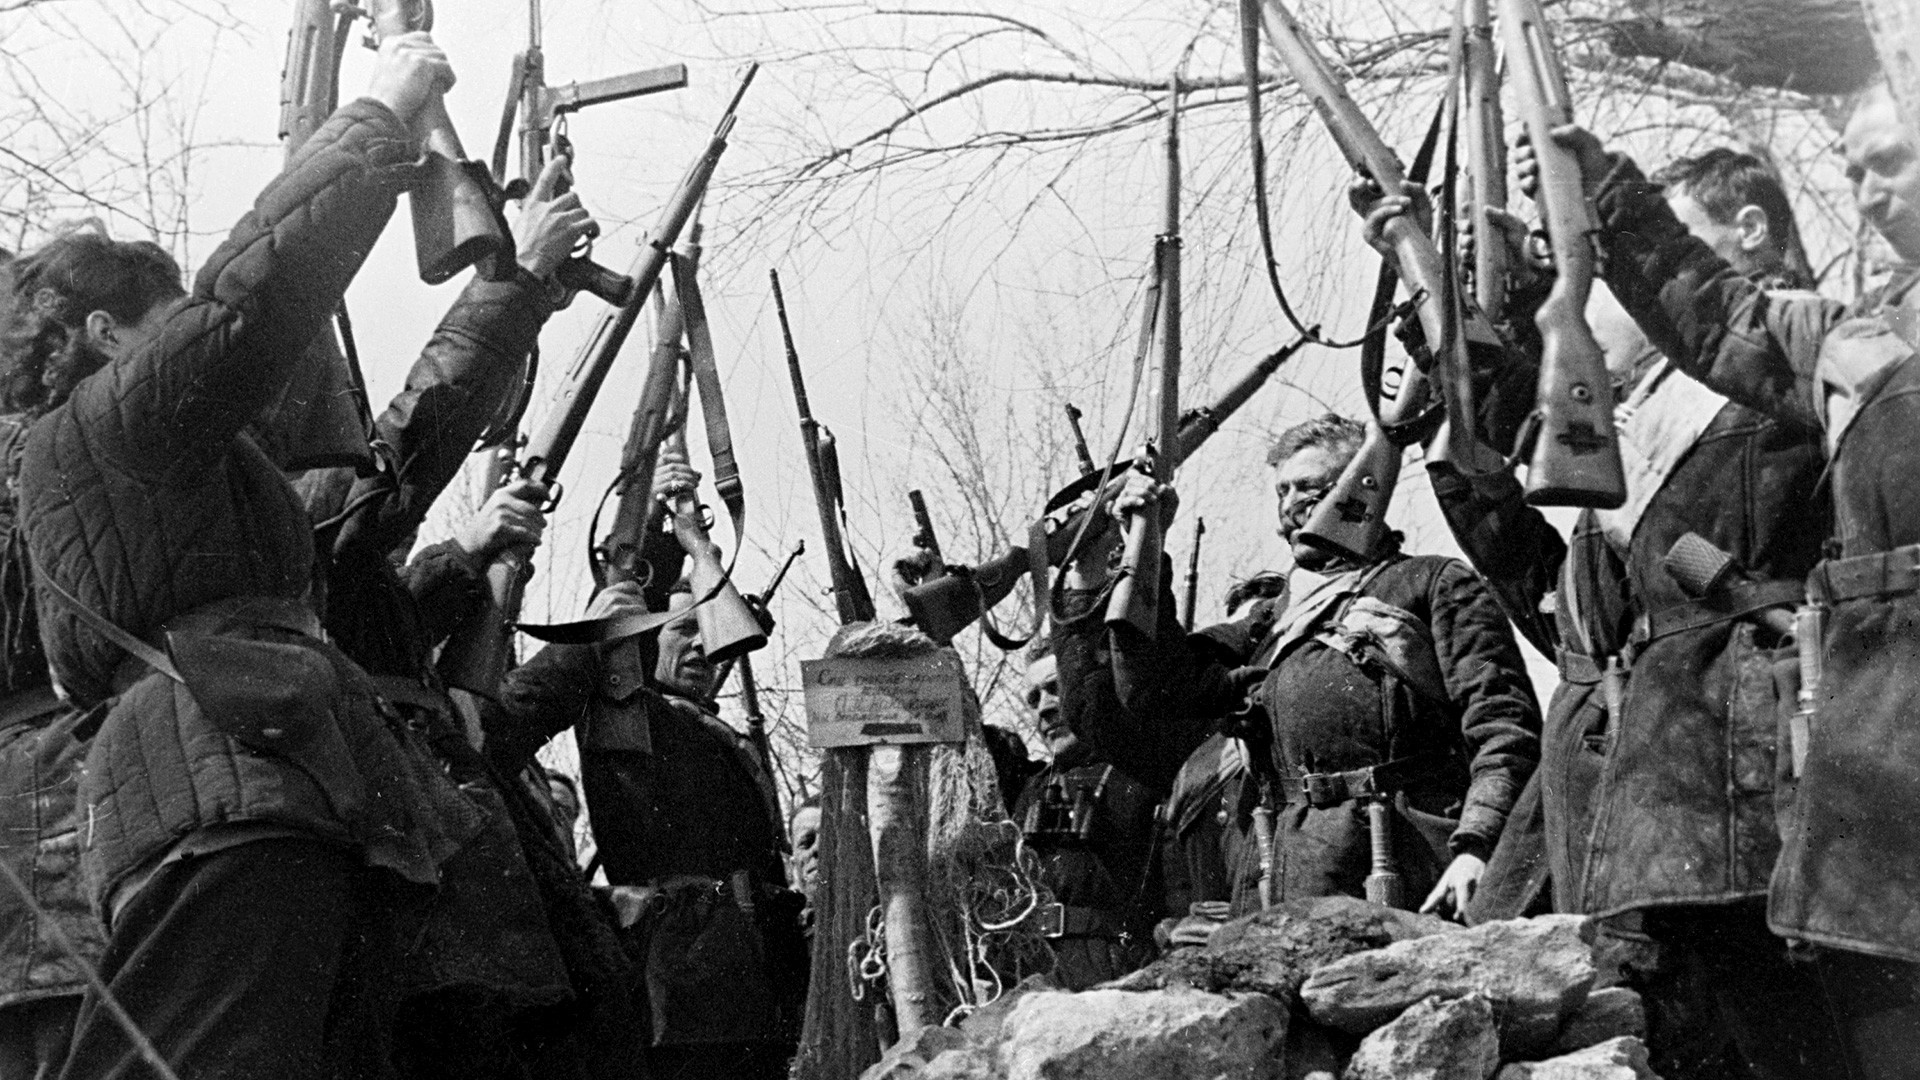 Guerrillas swearing to revenge for their comrade killed by the Nazis near his tomb.